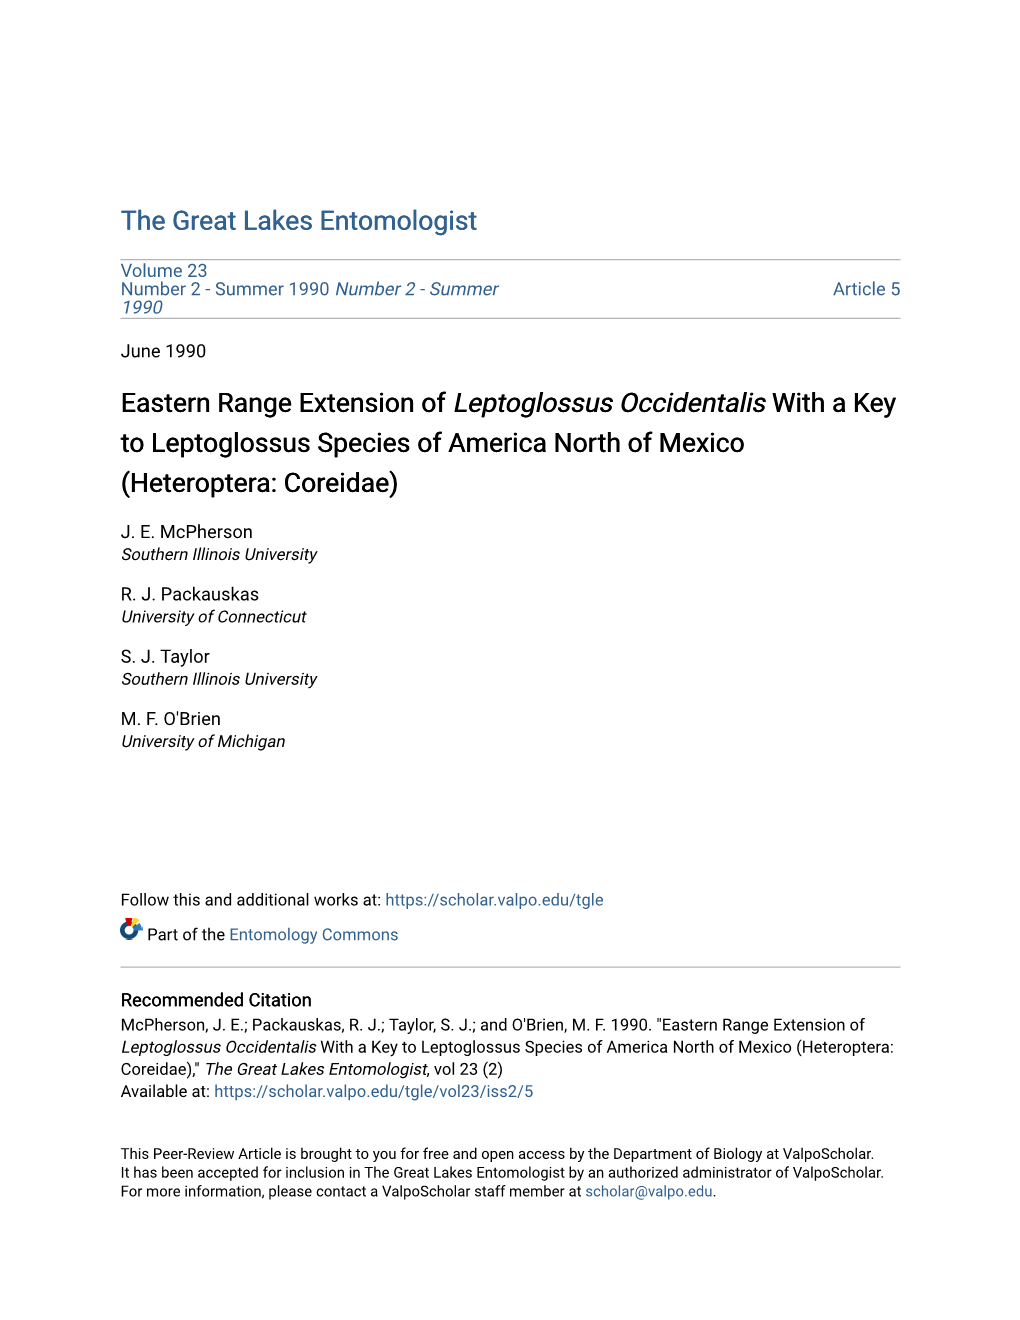 Eastern Range Extension of Leptoglossus Occidentalis with a Key to Leptoglossus Species of America North of Mexico (Heteroptera: Coreidae)